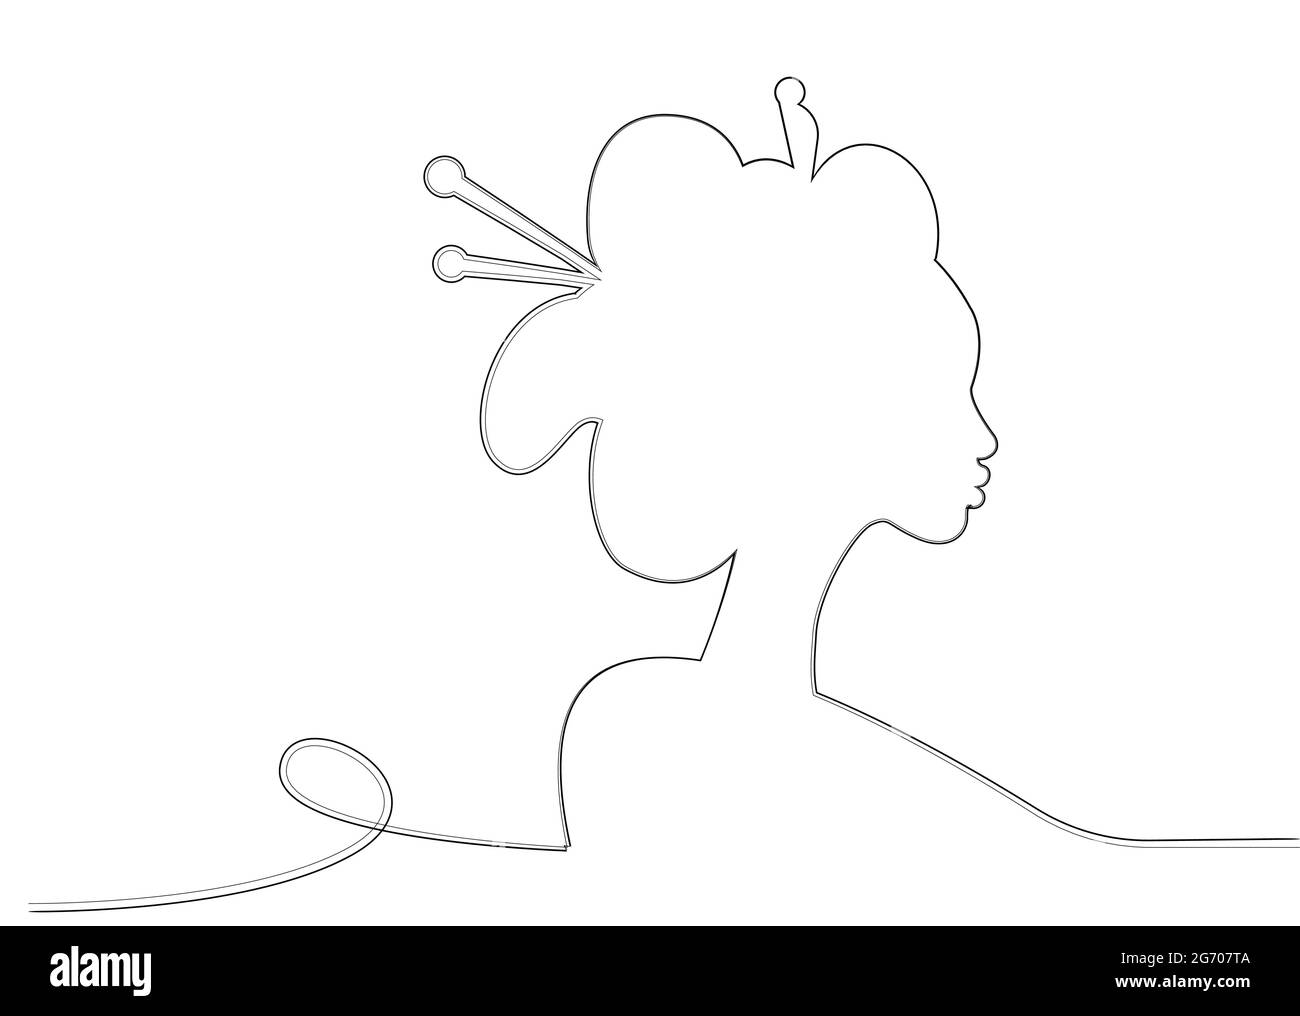 Silhouette of young Japanese girl an ancient hairstyle. Black Line art style design. Geisha, maiko, princess. Traditional Asian woman sketch drawing. Stock Vector